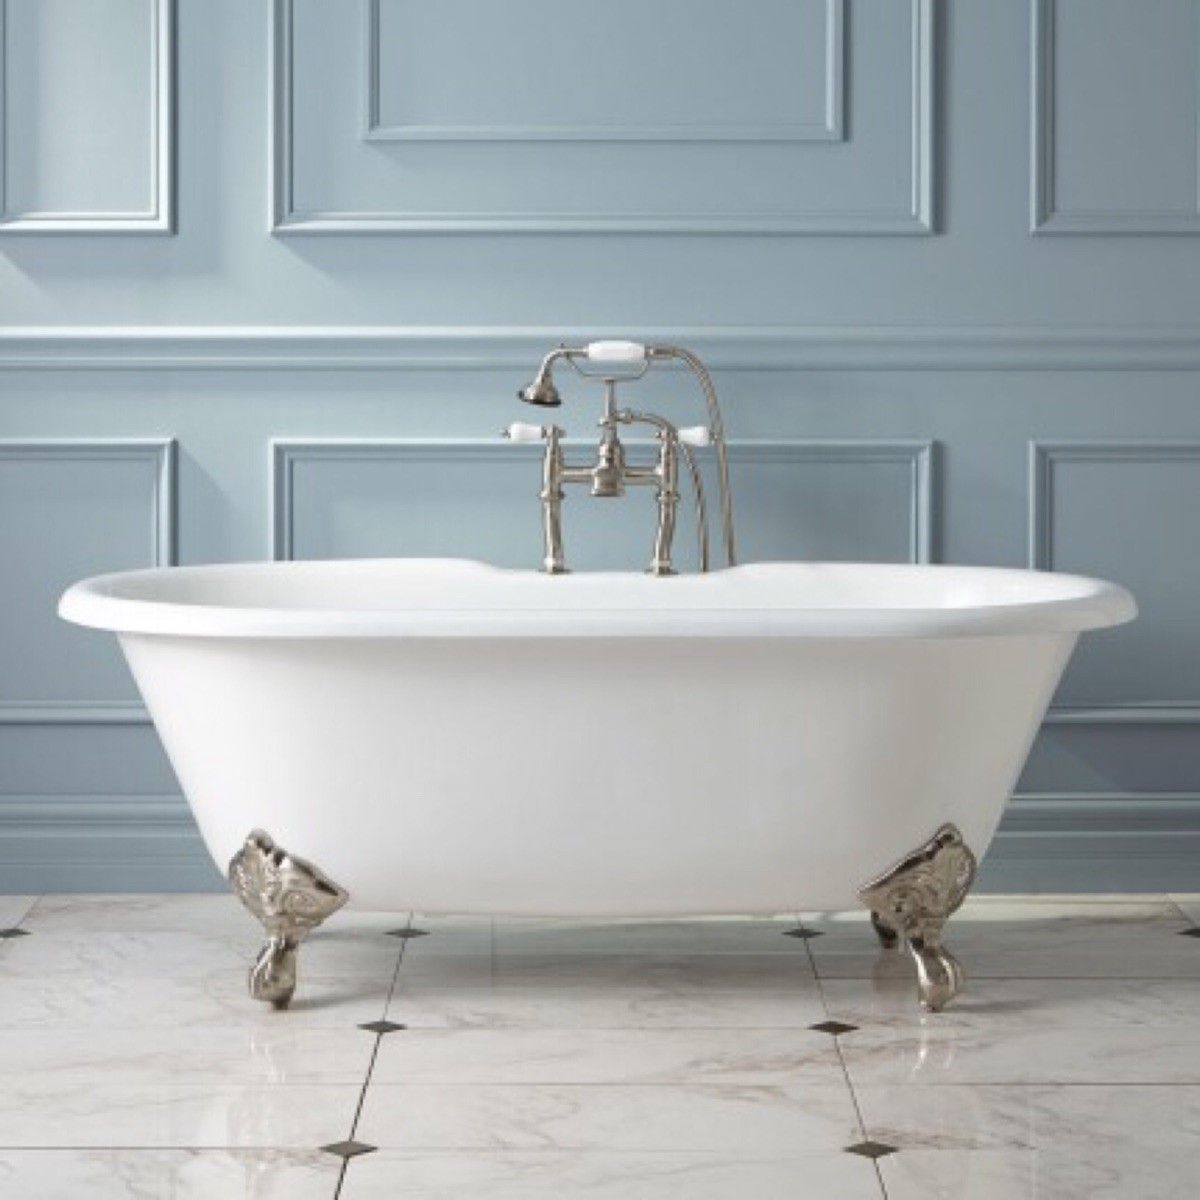 All about Bathtub Refinishing Review